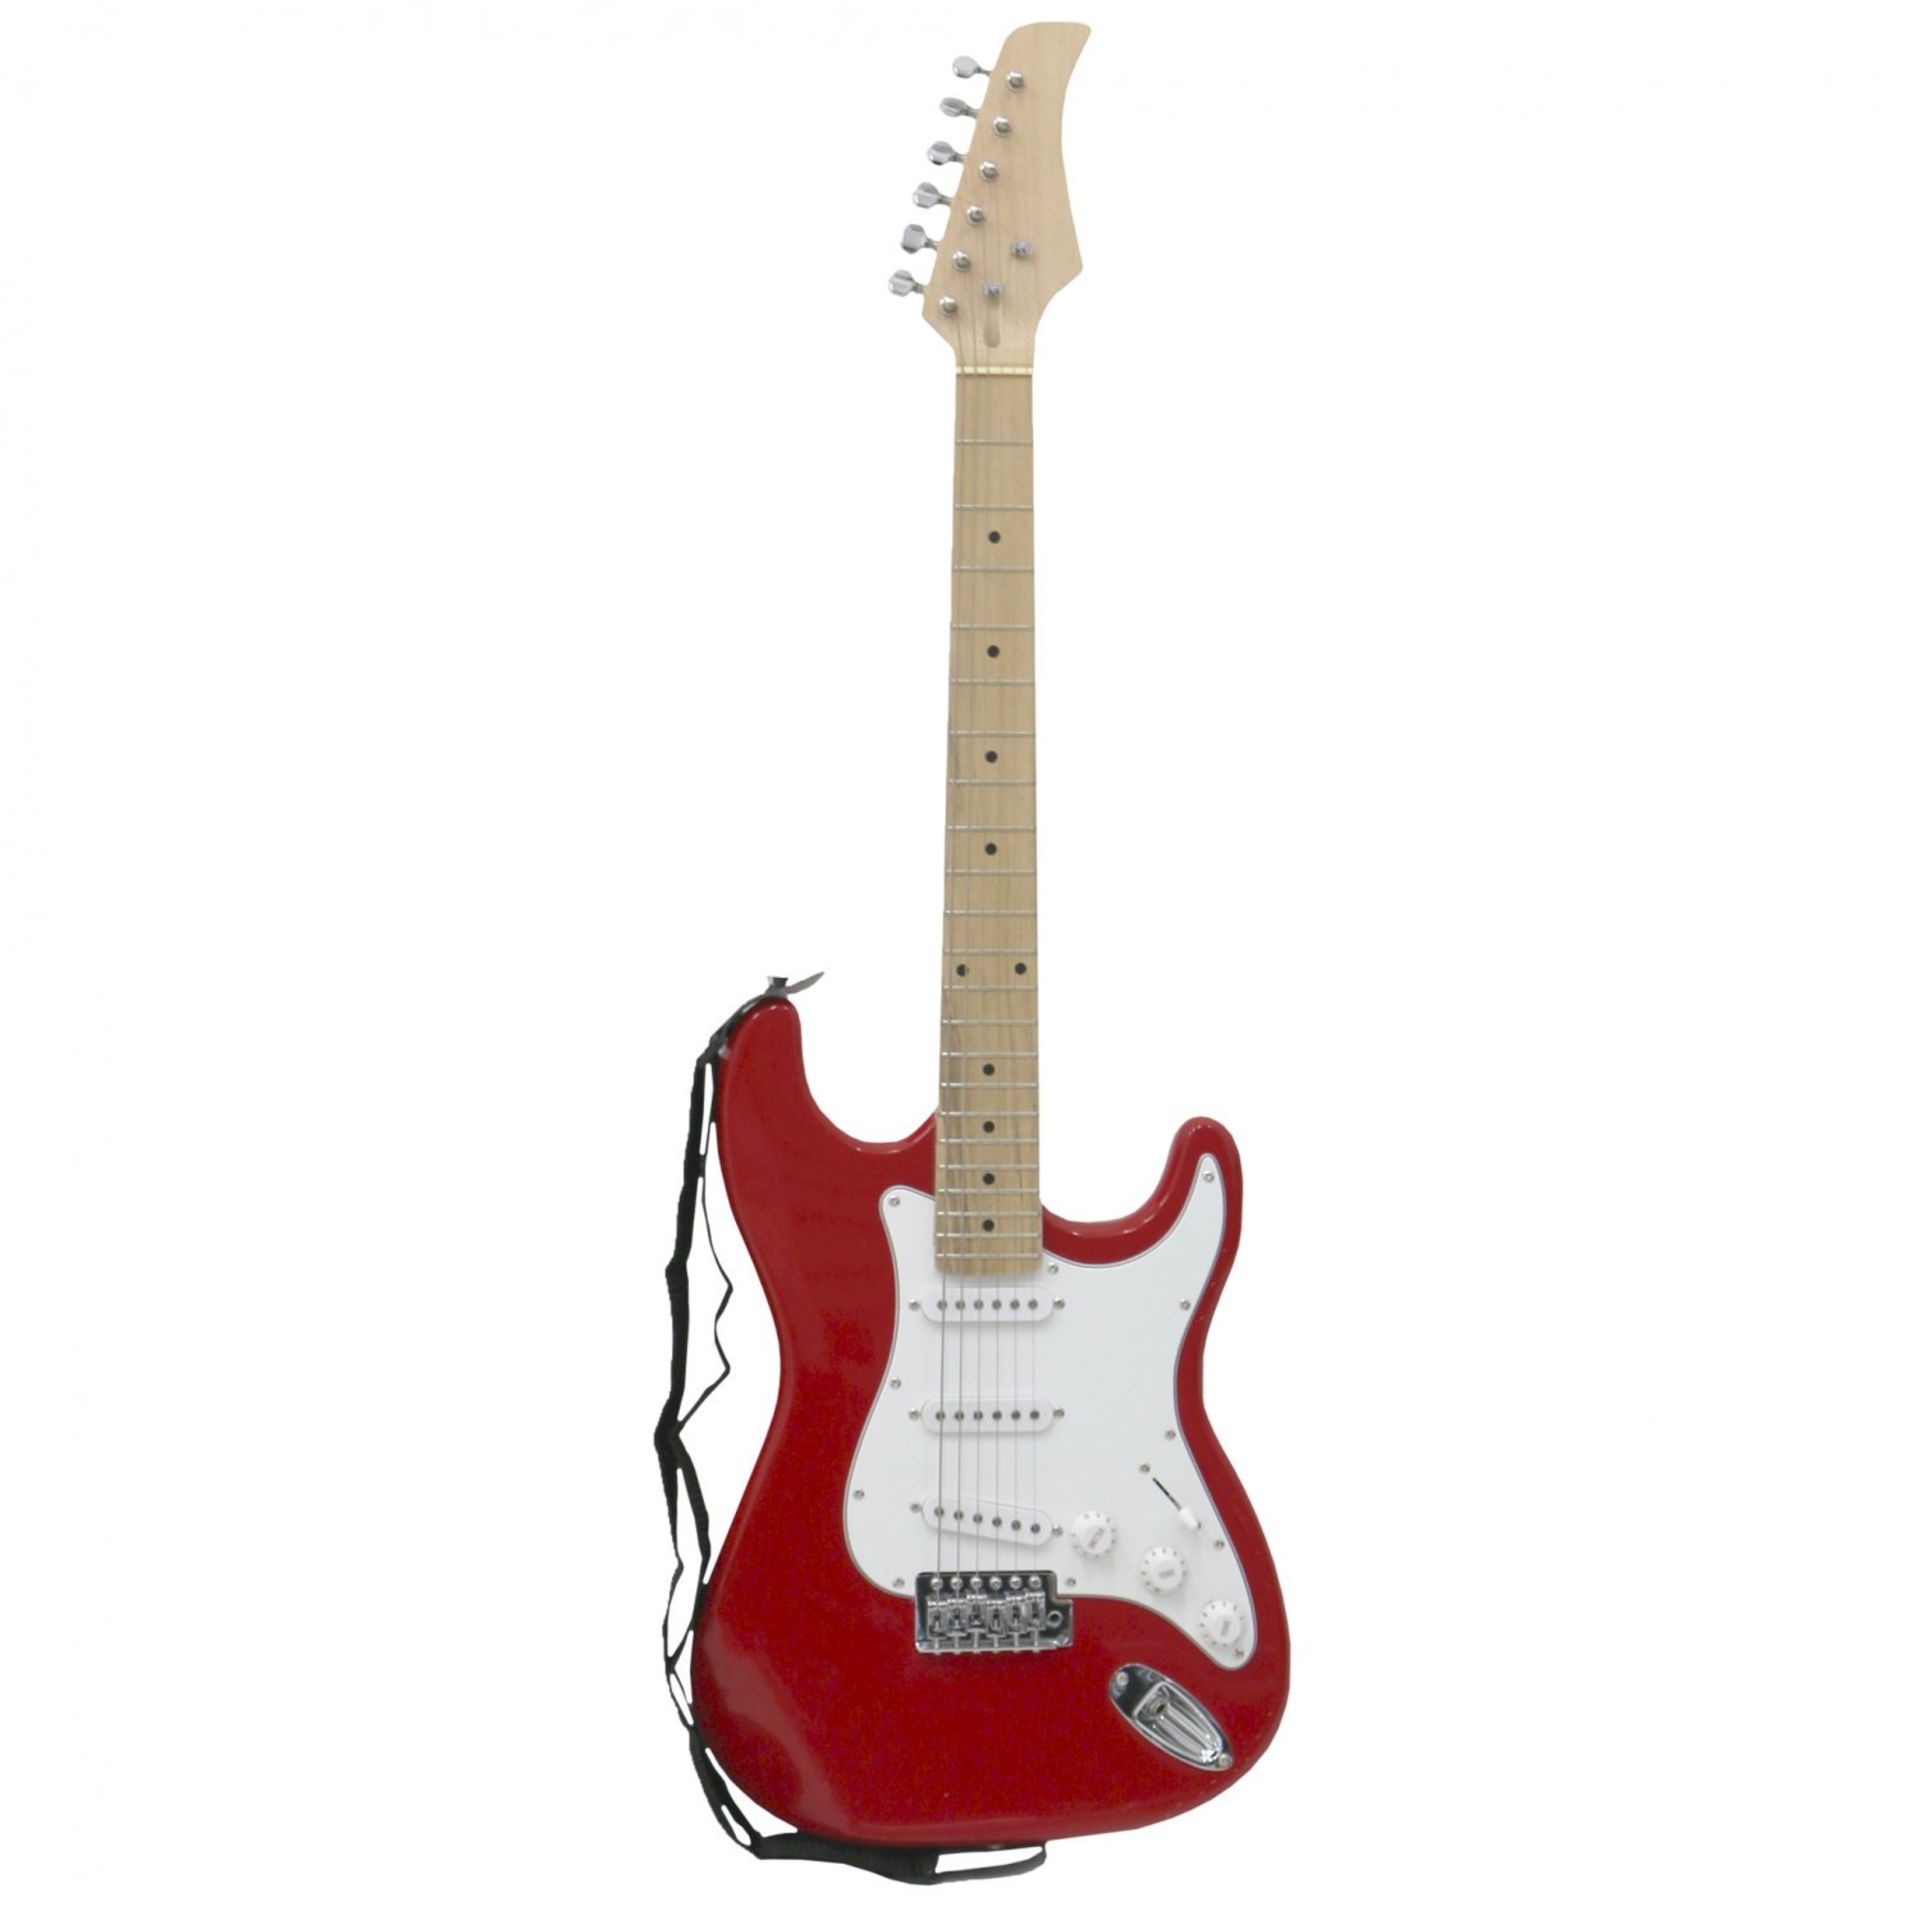 (EE472) The ST is a stratocaster-style electric guitar at an incredible price - great for seaso... - Image 3 of 4